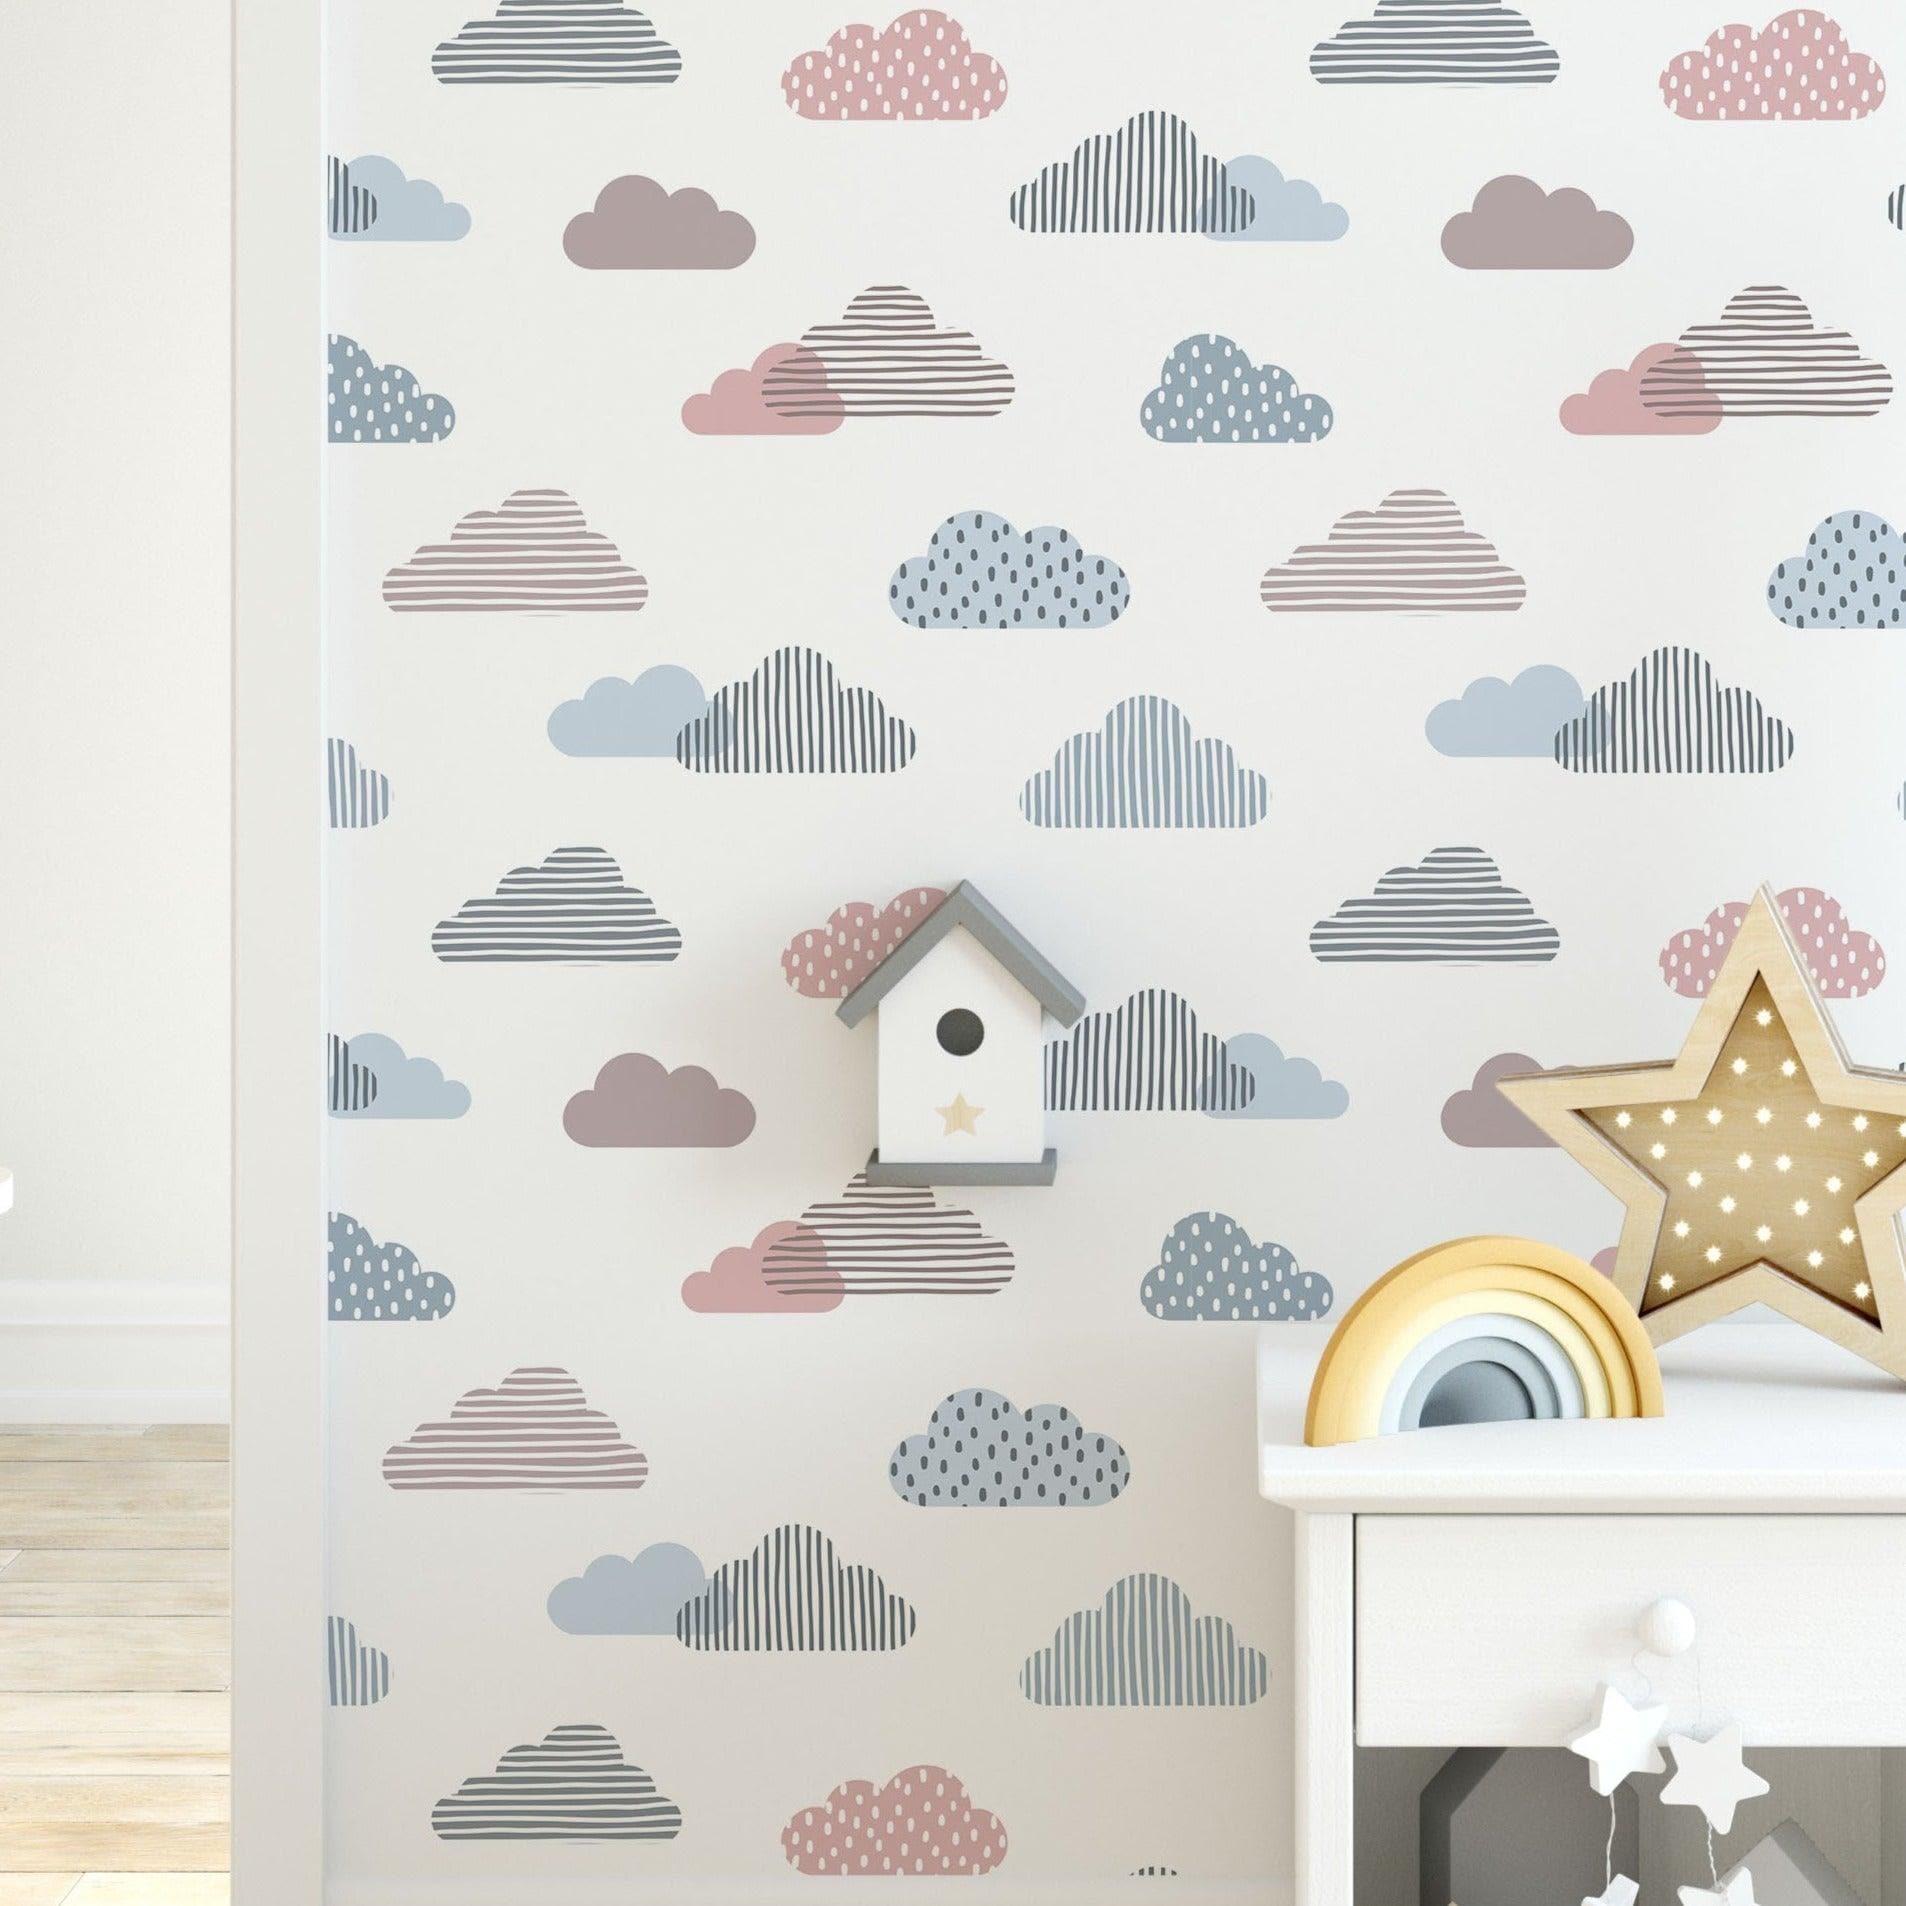 Colorful Geometric Clouds Removable Wallpaper Colorful Geometric Clouds Removable Wallpaper 